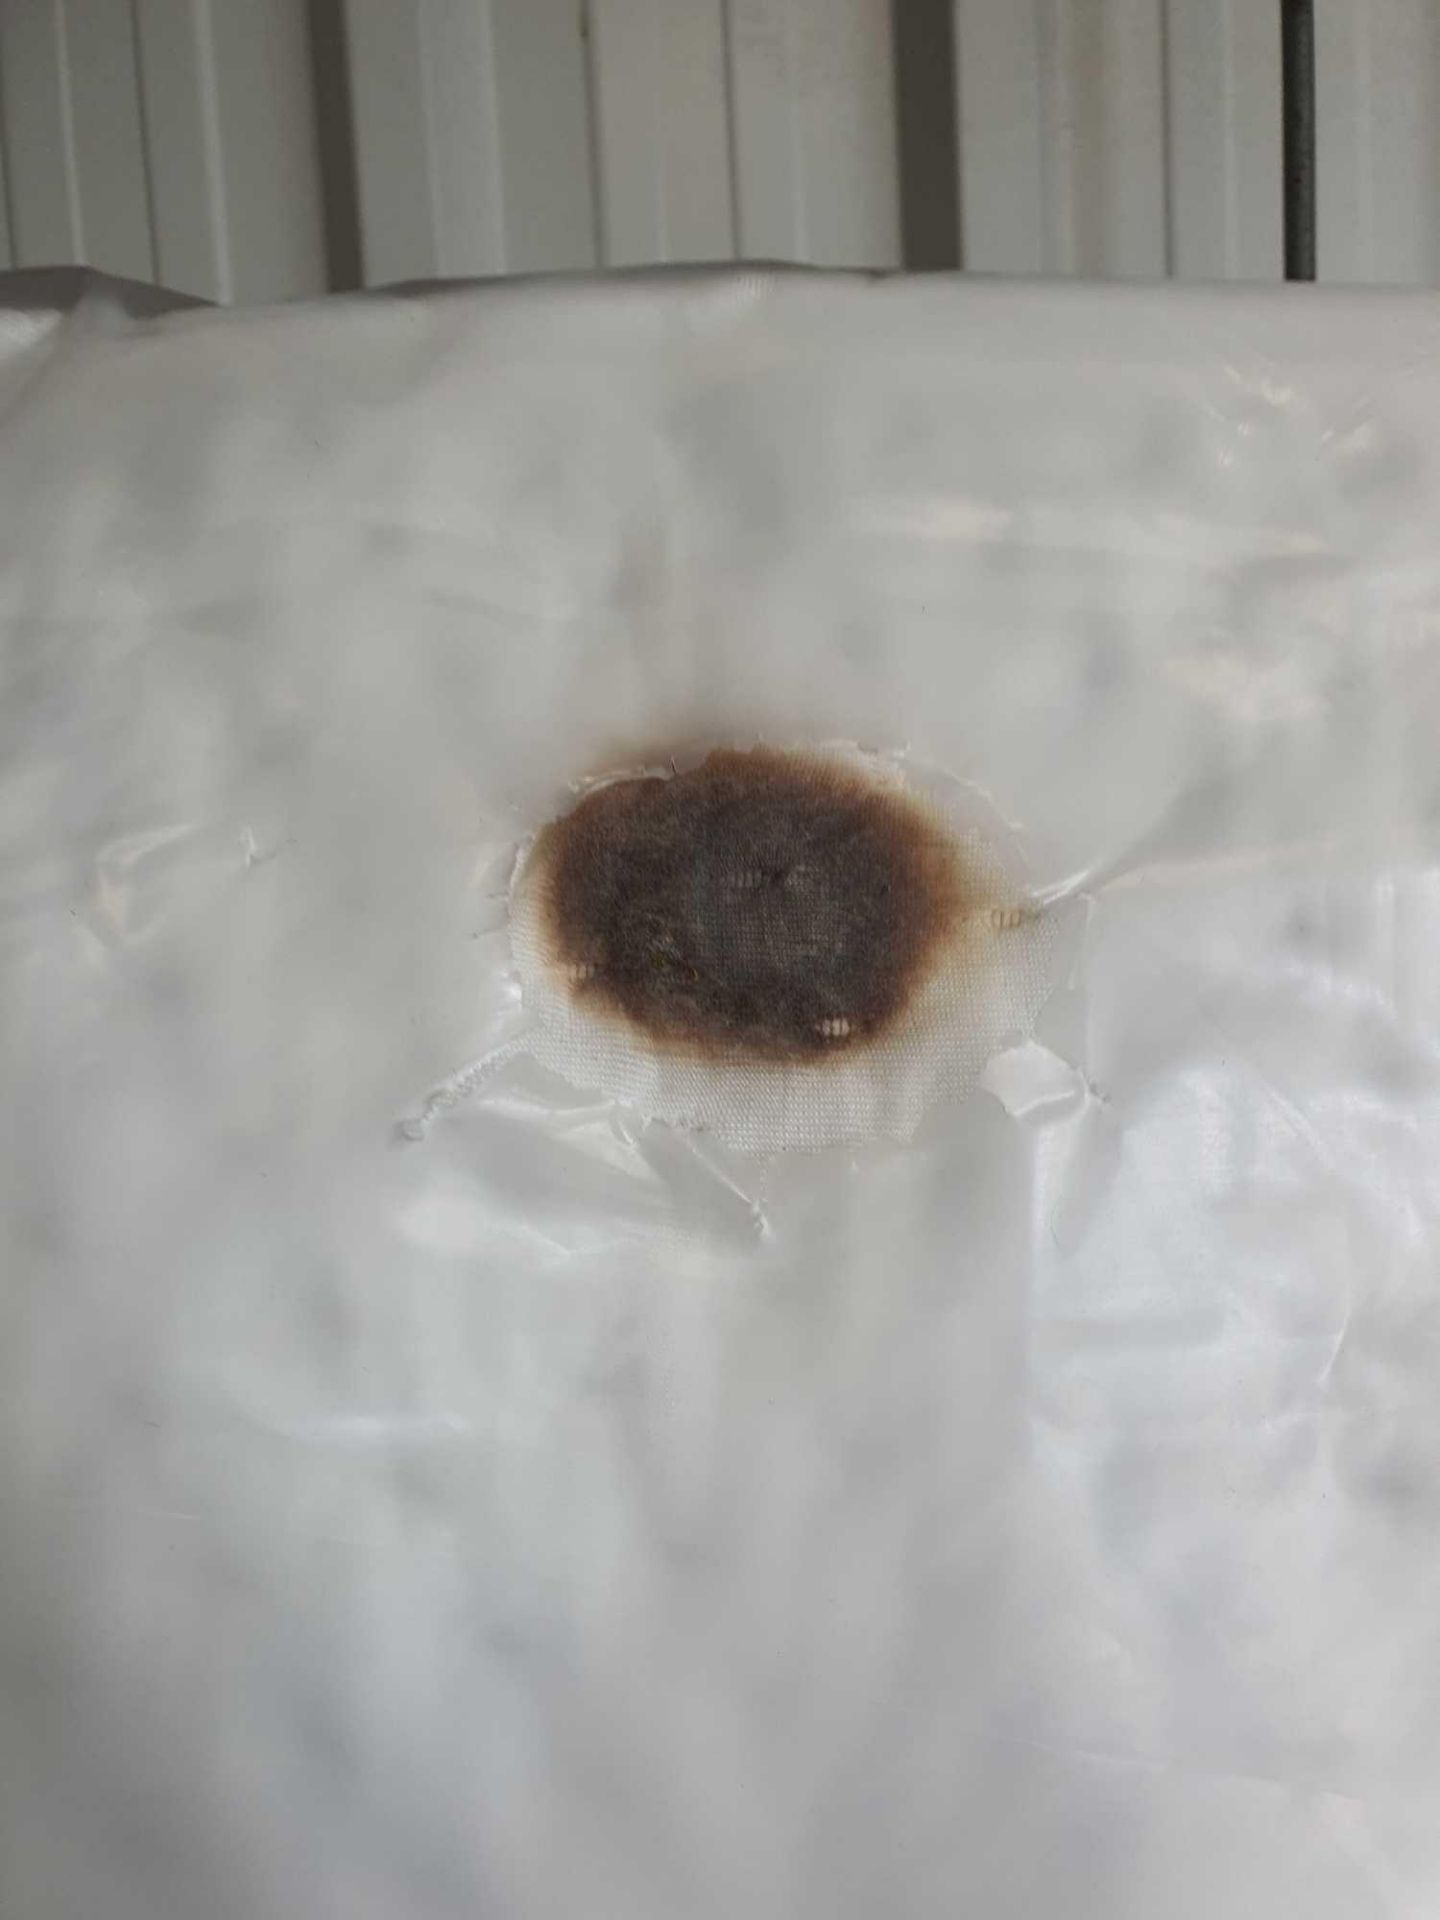 Sleepright.beds Fusion 1500 Firmness Medium 4 Foot 6 Inch Double White Burn Mark At The Top SEE - Image 2 of 4